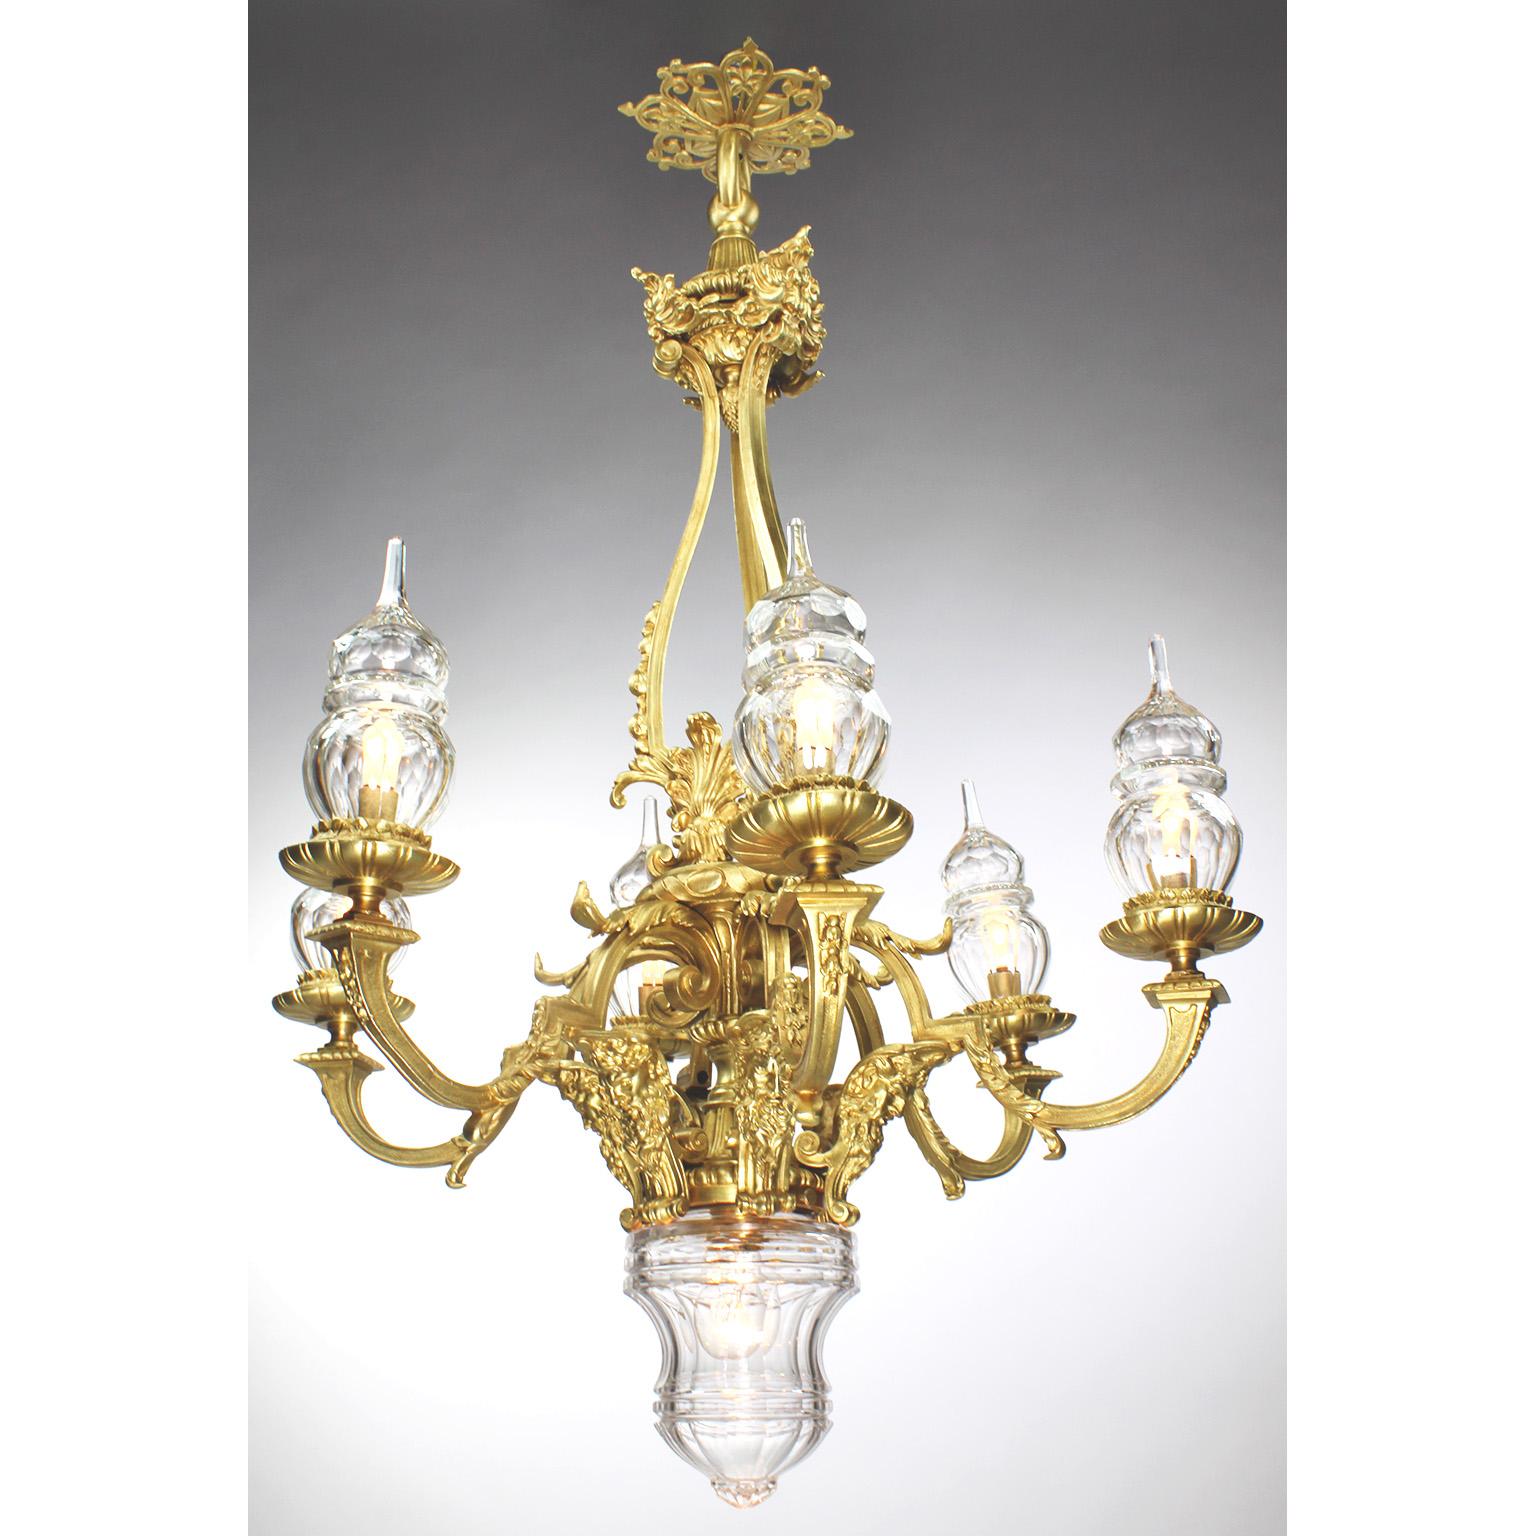 A French Louis XVI style gilt-bronze and blown cut-glass seven-light figural chandelier in the manner of Baccarat. The elongated gilt-bronze body surmounted with acanthus and leaf decorations, with six scrolled candle-arms, each fitted with domed